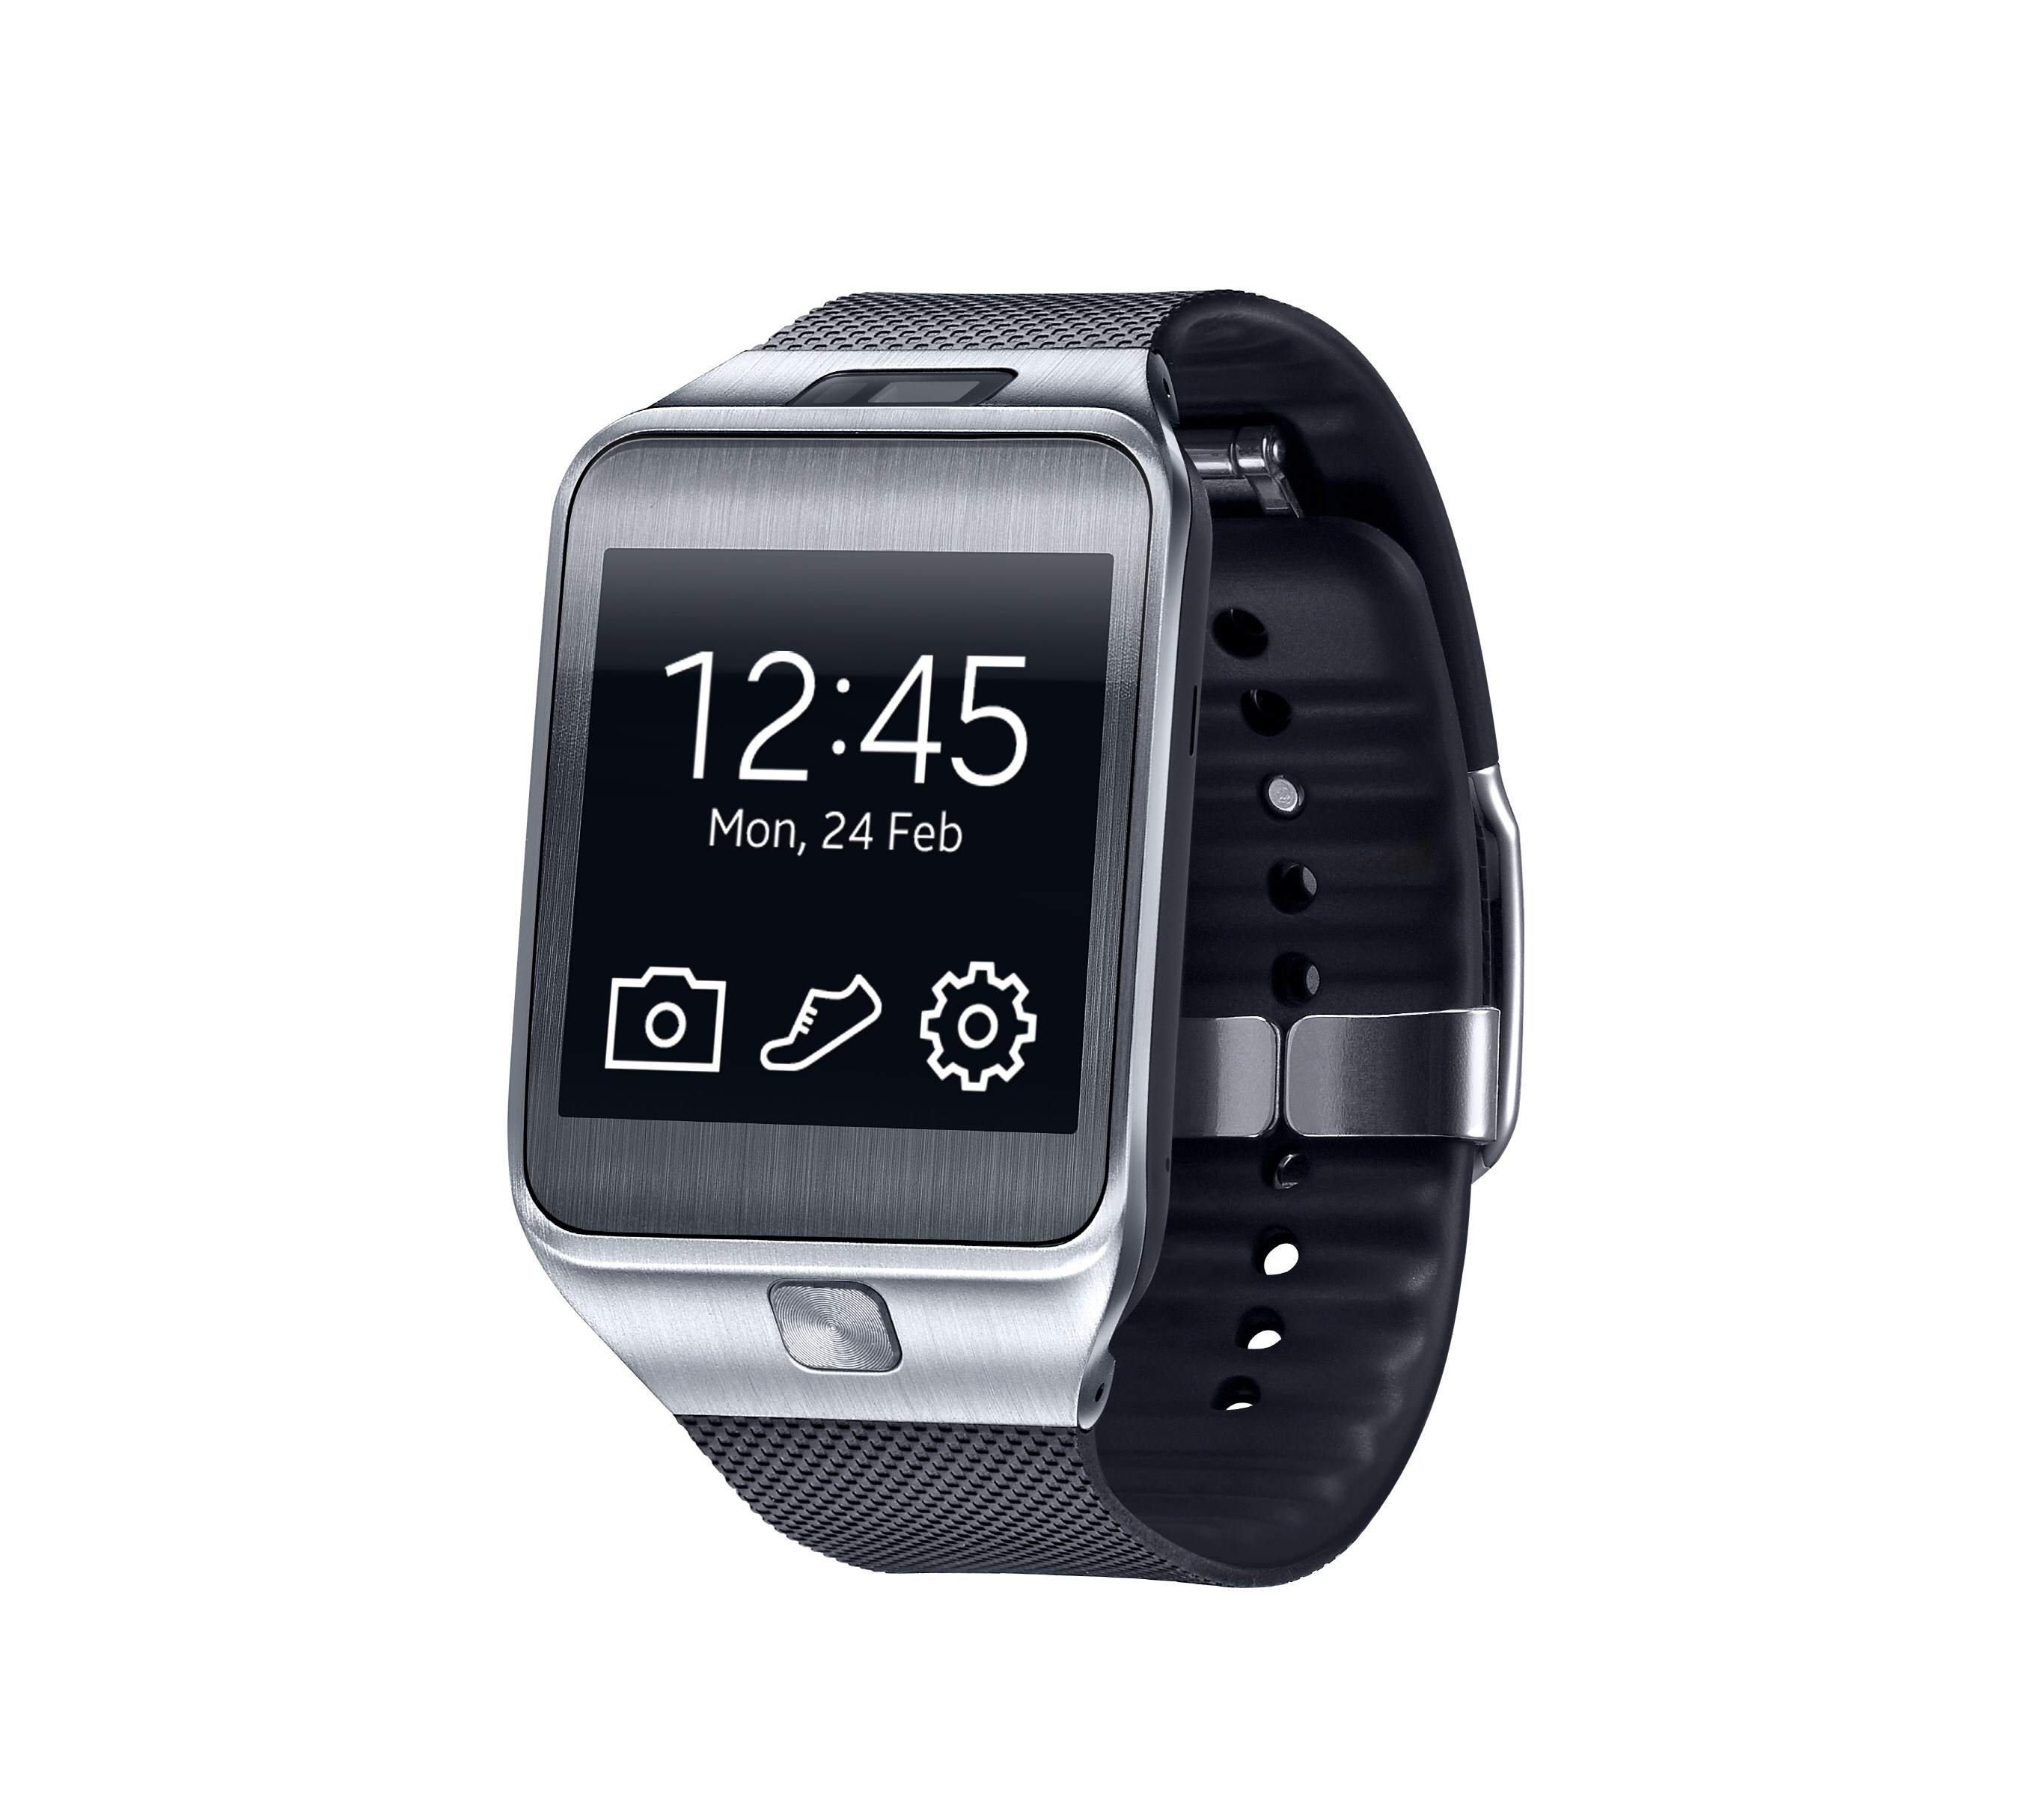 MWC 2014: Samsung announces Tizen-powered Gear 2 and Gear 2 Neo smartwatches